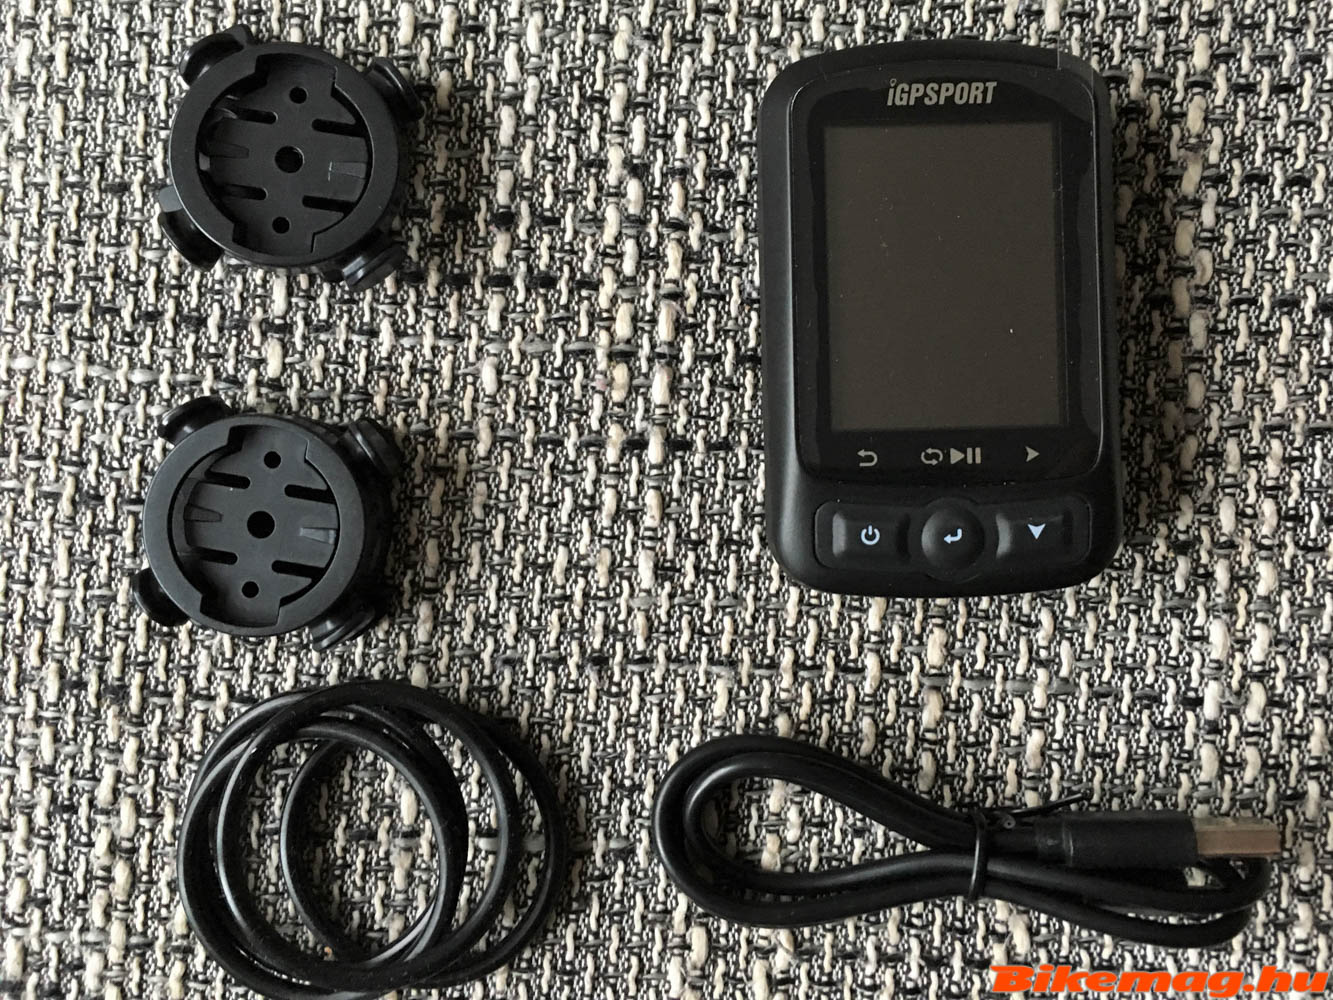 iGPSPORT iGS618 review - An emerging brand on the cycling GPS 